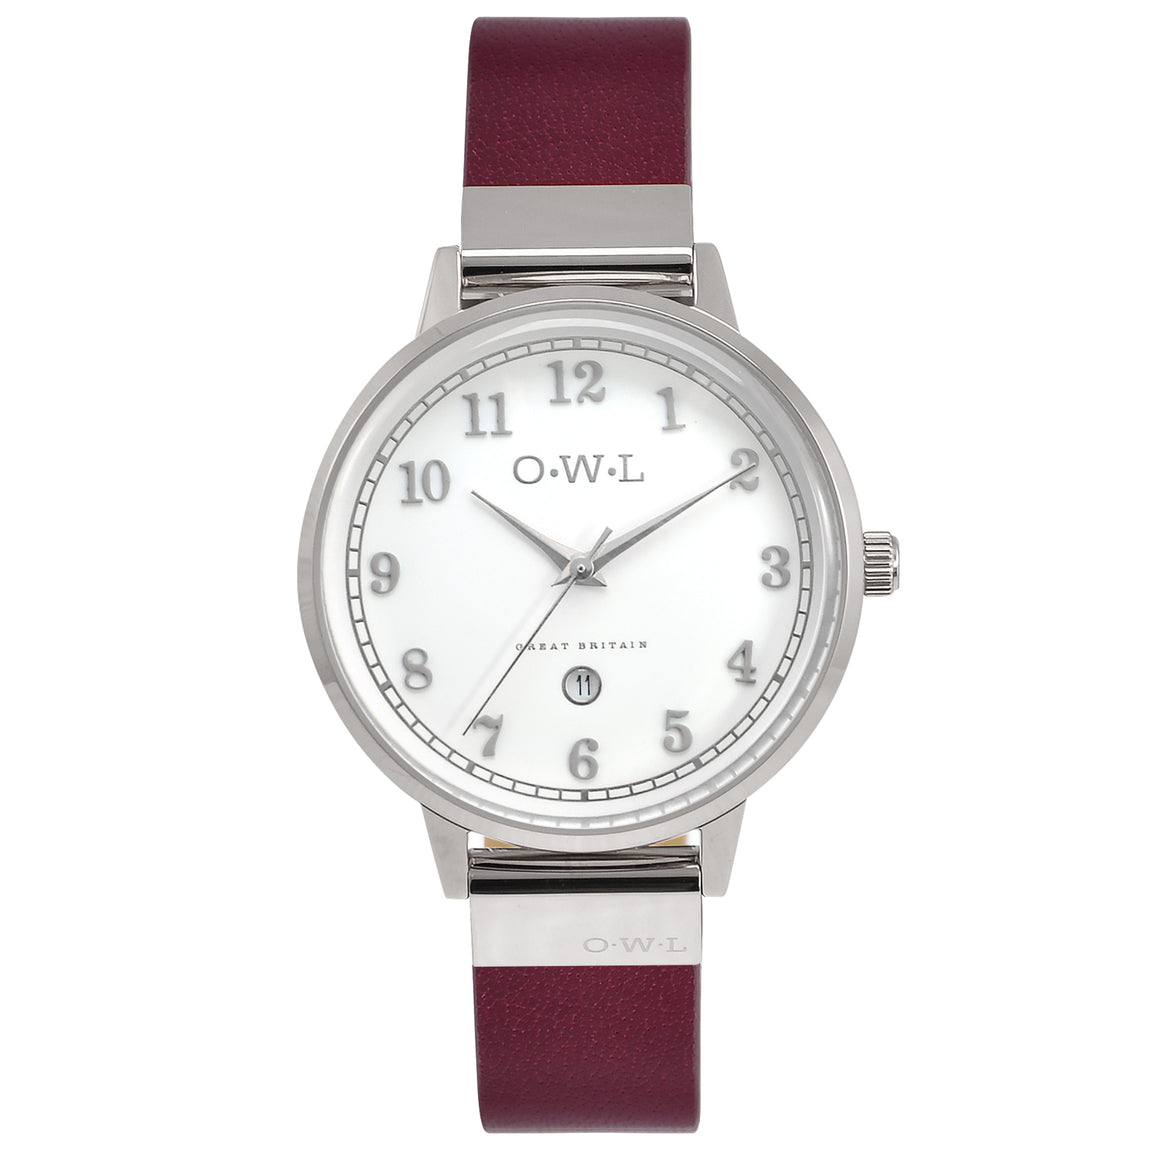 SUTTON LADIES WATCH WITH WHITE DIAL ON A POLISHED SILVER CASE & DEEP RED LEATHER STRAP